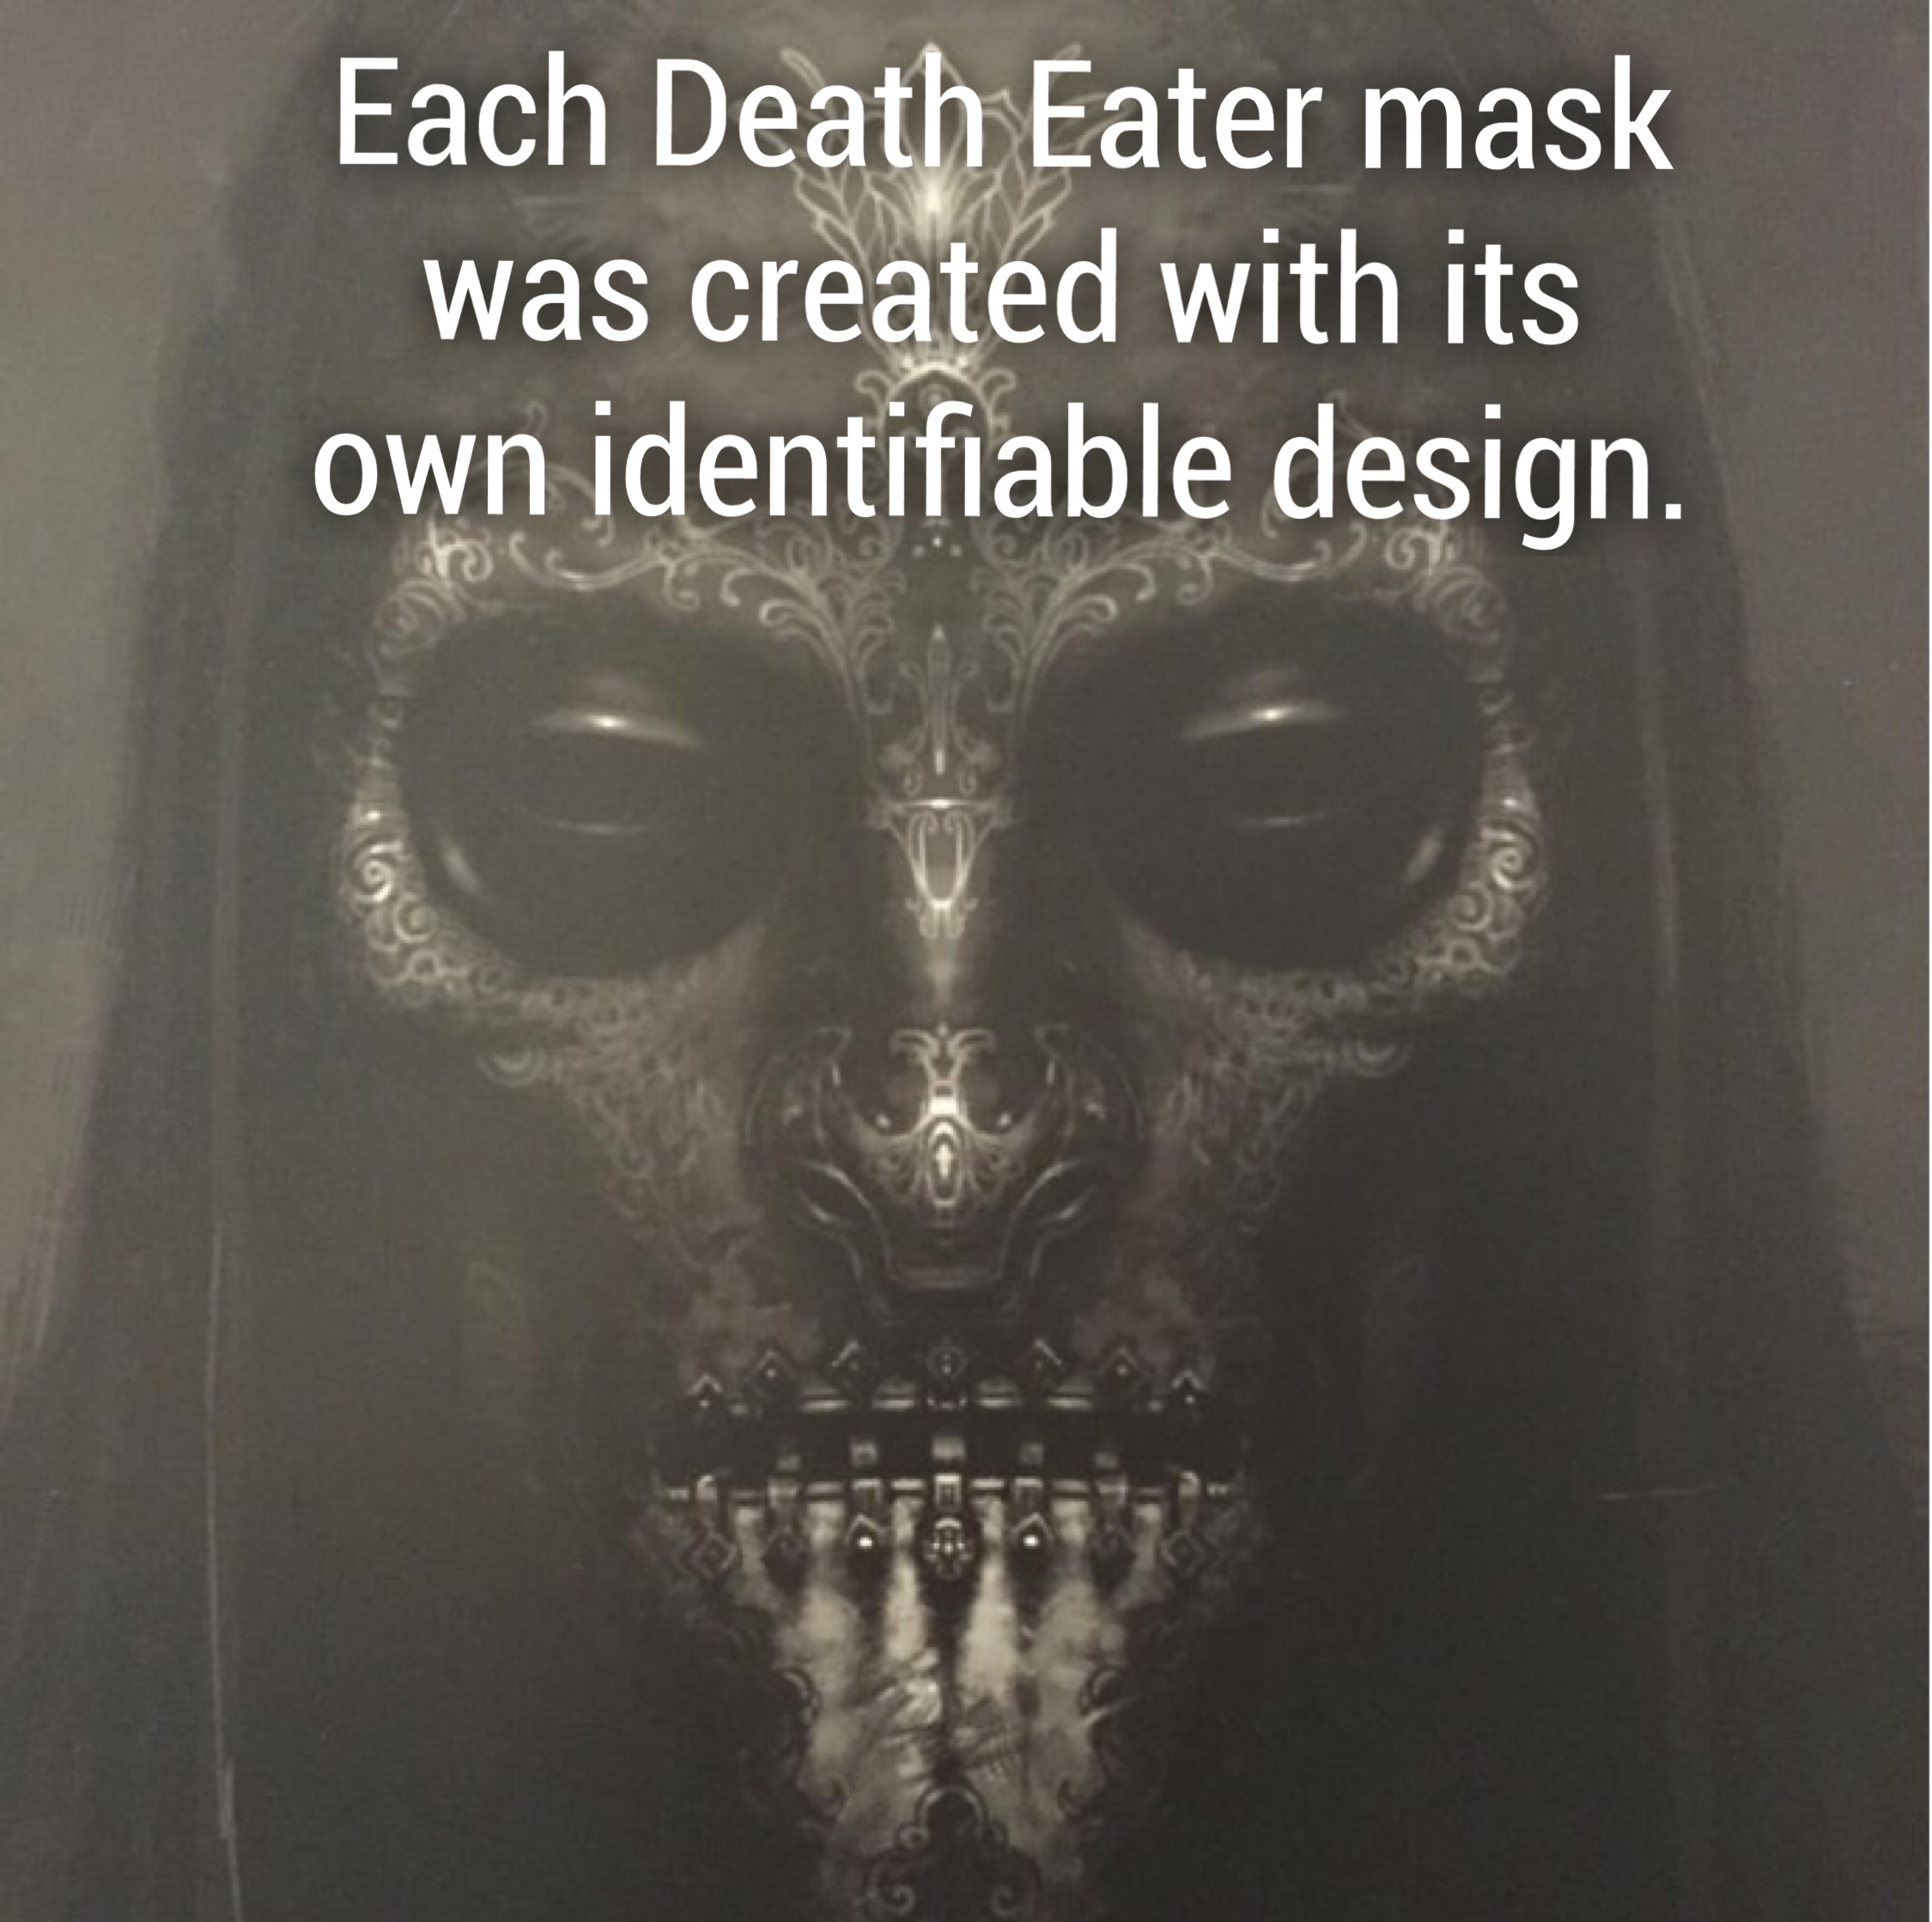 Death Eaters - Each Death Eater mask was created with its own identifiable design.